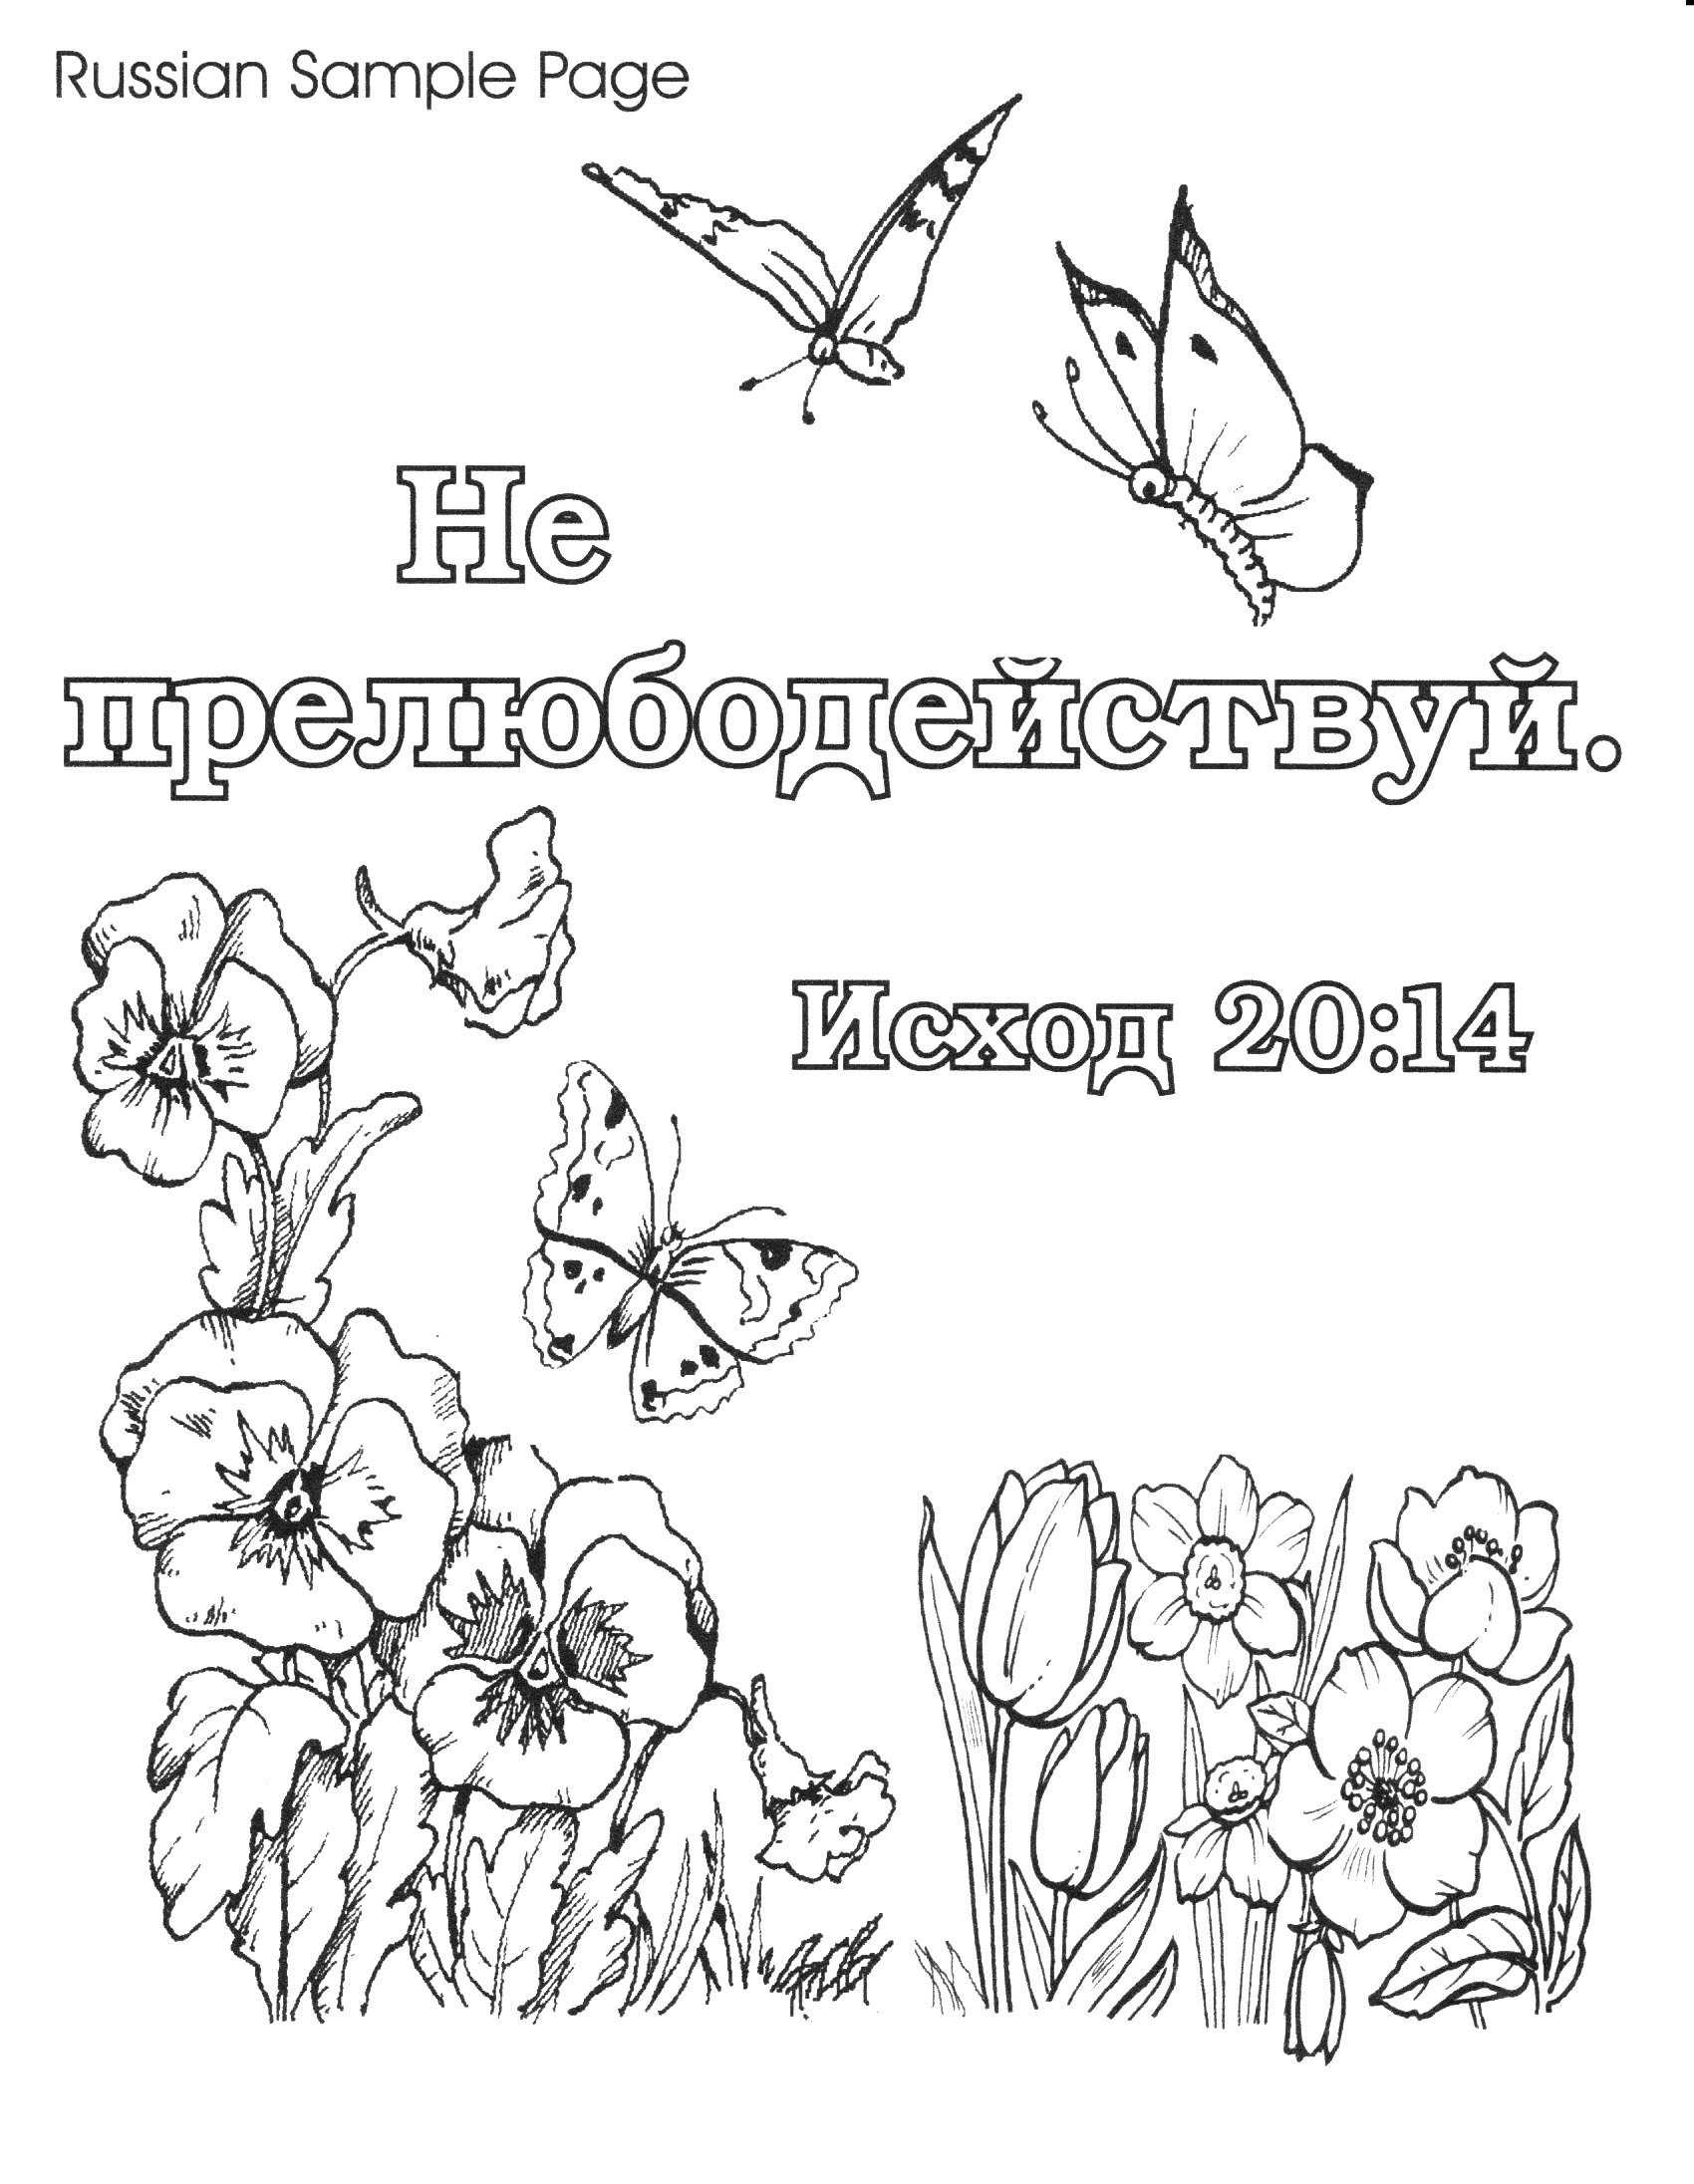 Spanish Family Worksheets or Spanish Coloring Pages Heathermarxgallery